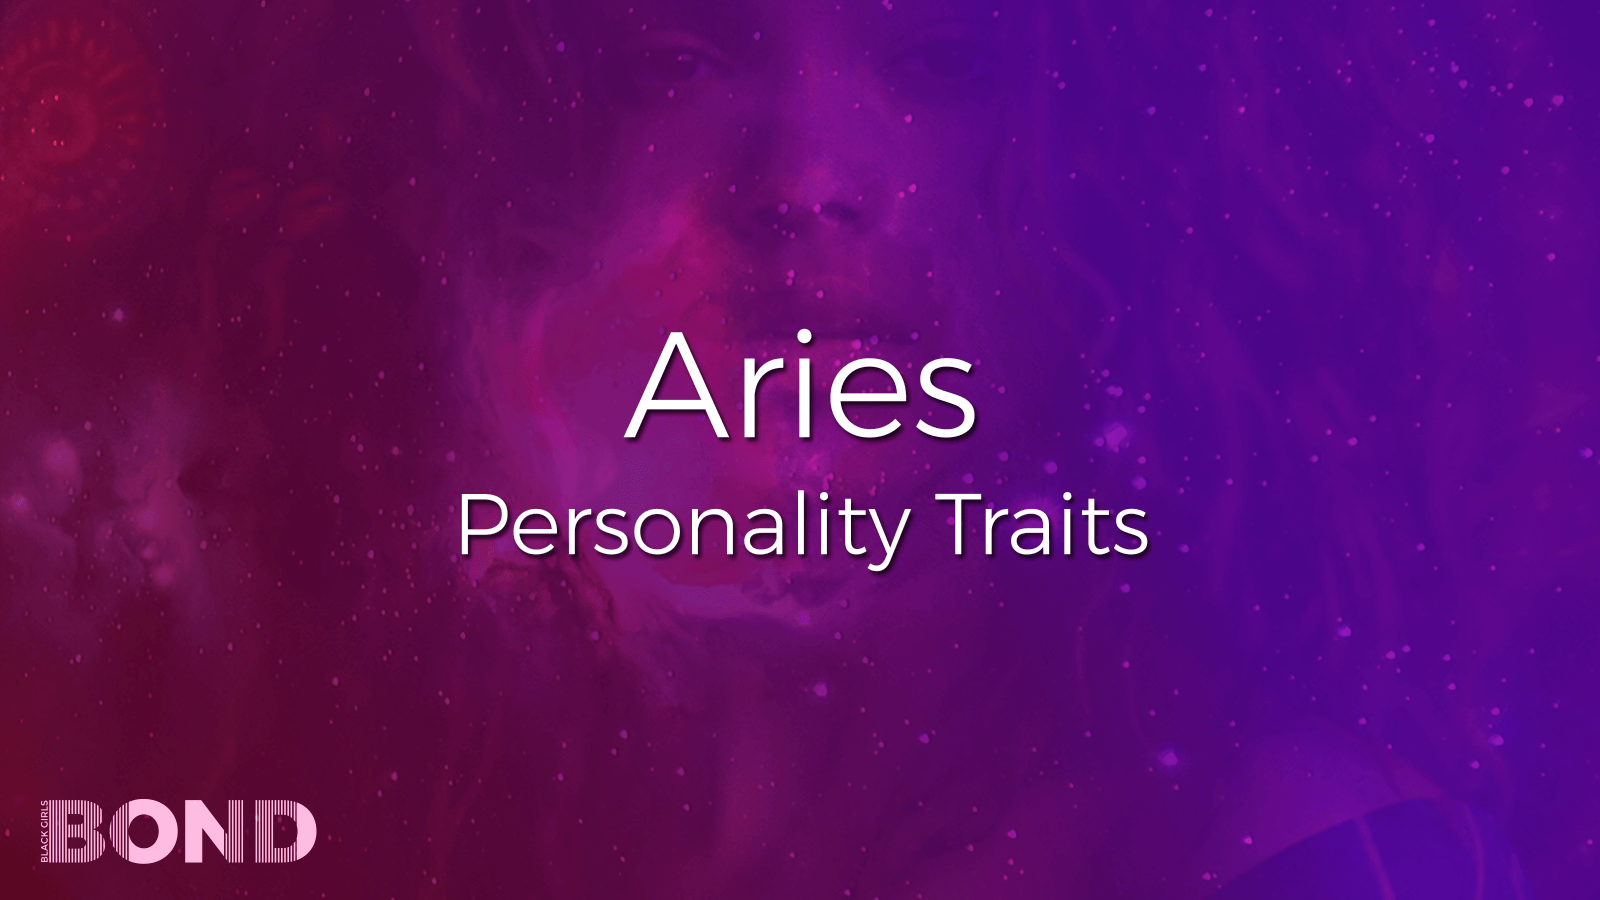 Aries Zodiac Sign: Personality Traits, Compatibility, Love, Relationships and More